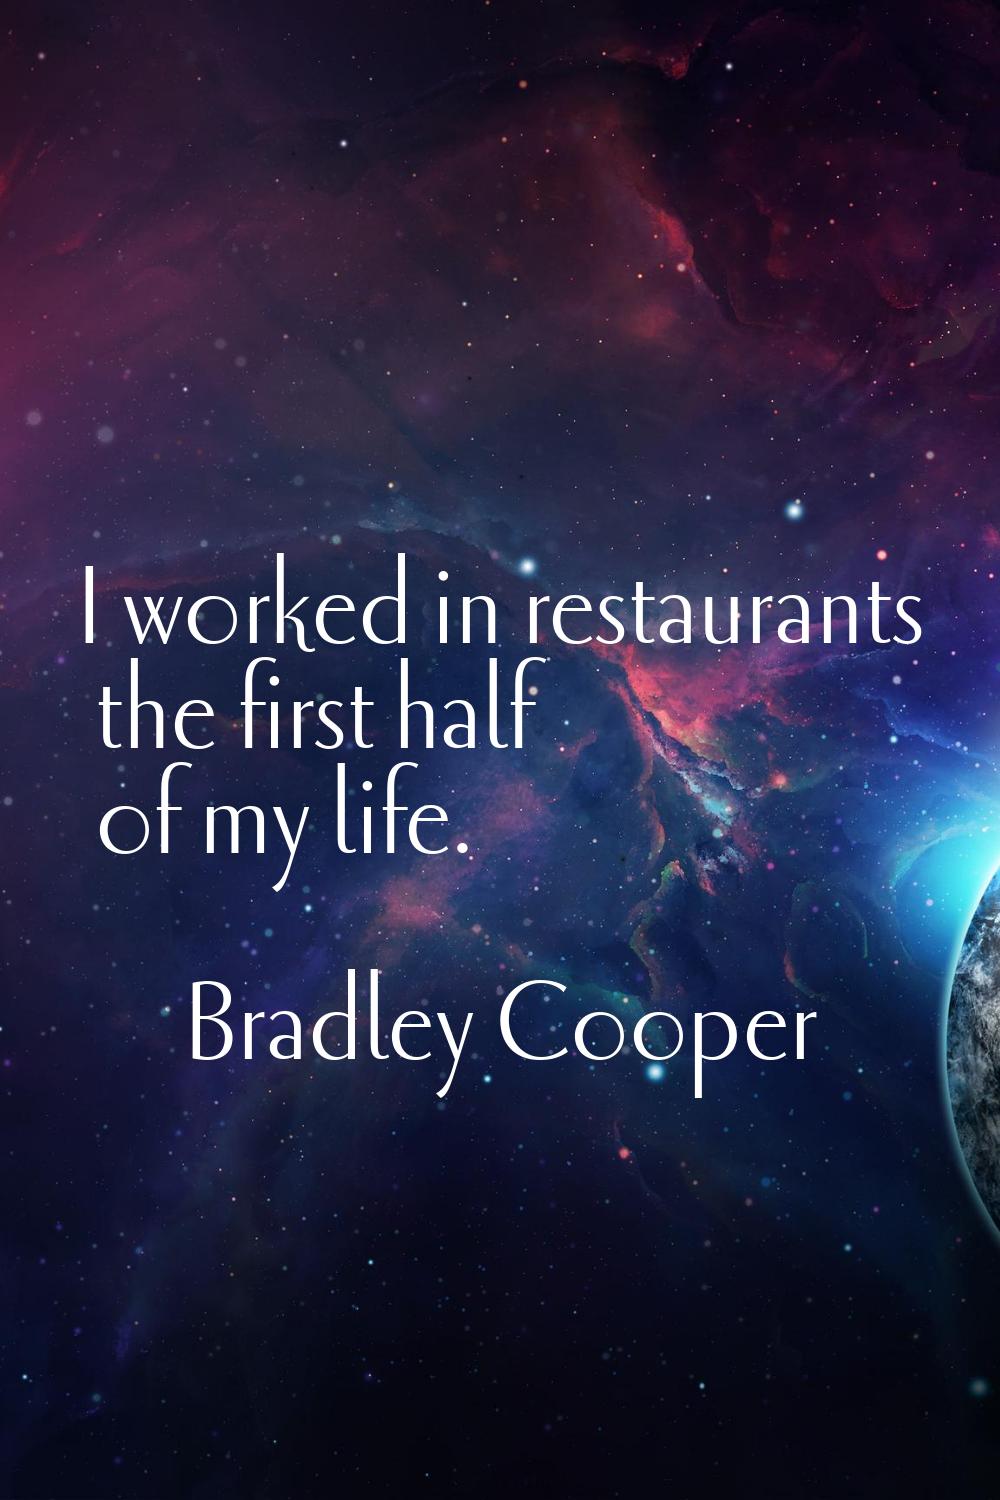 I worked in restaurants the first half of my life.